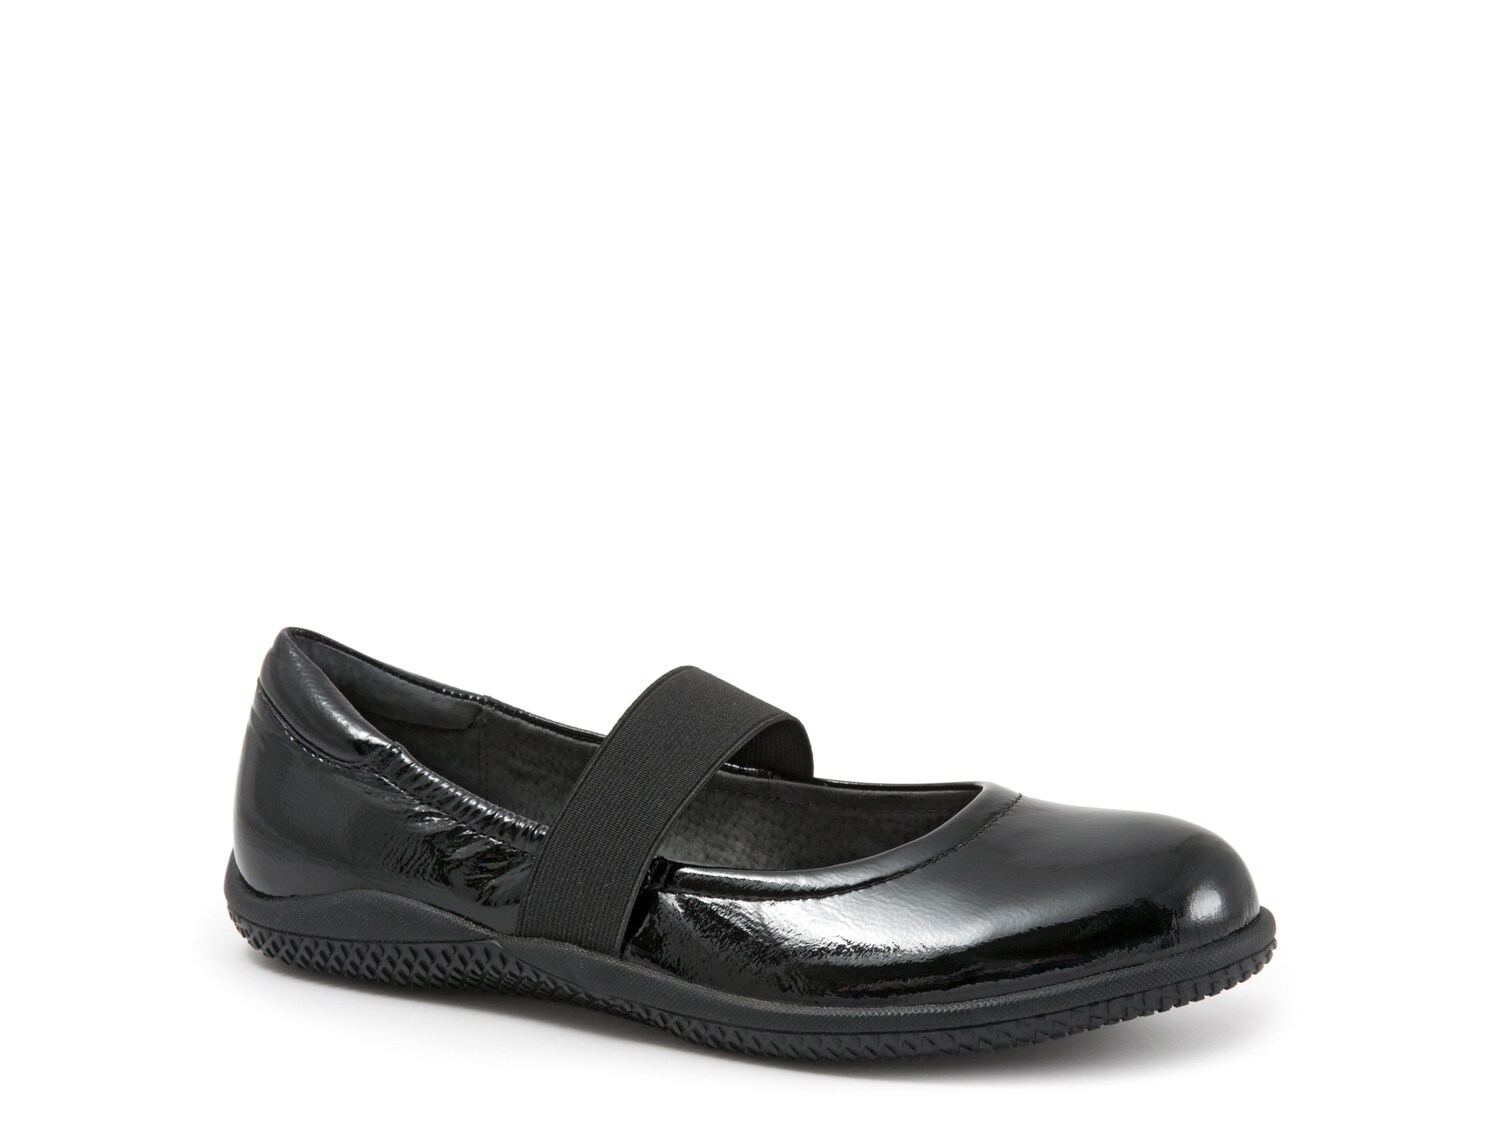 clarks shoes highpoint